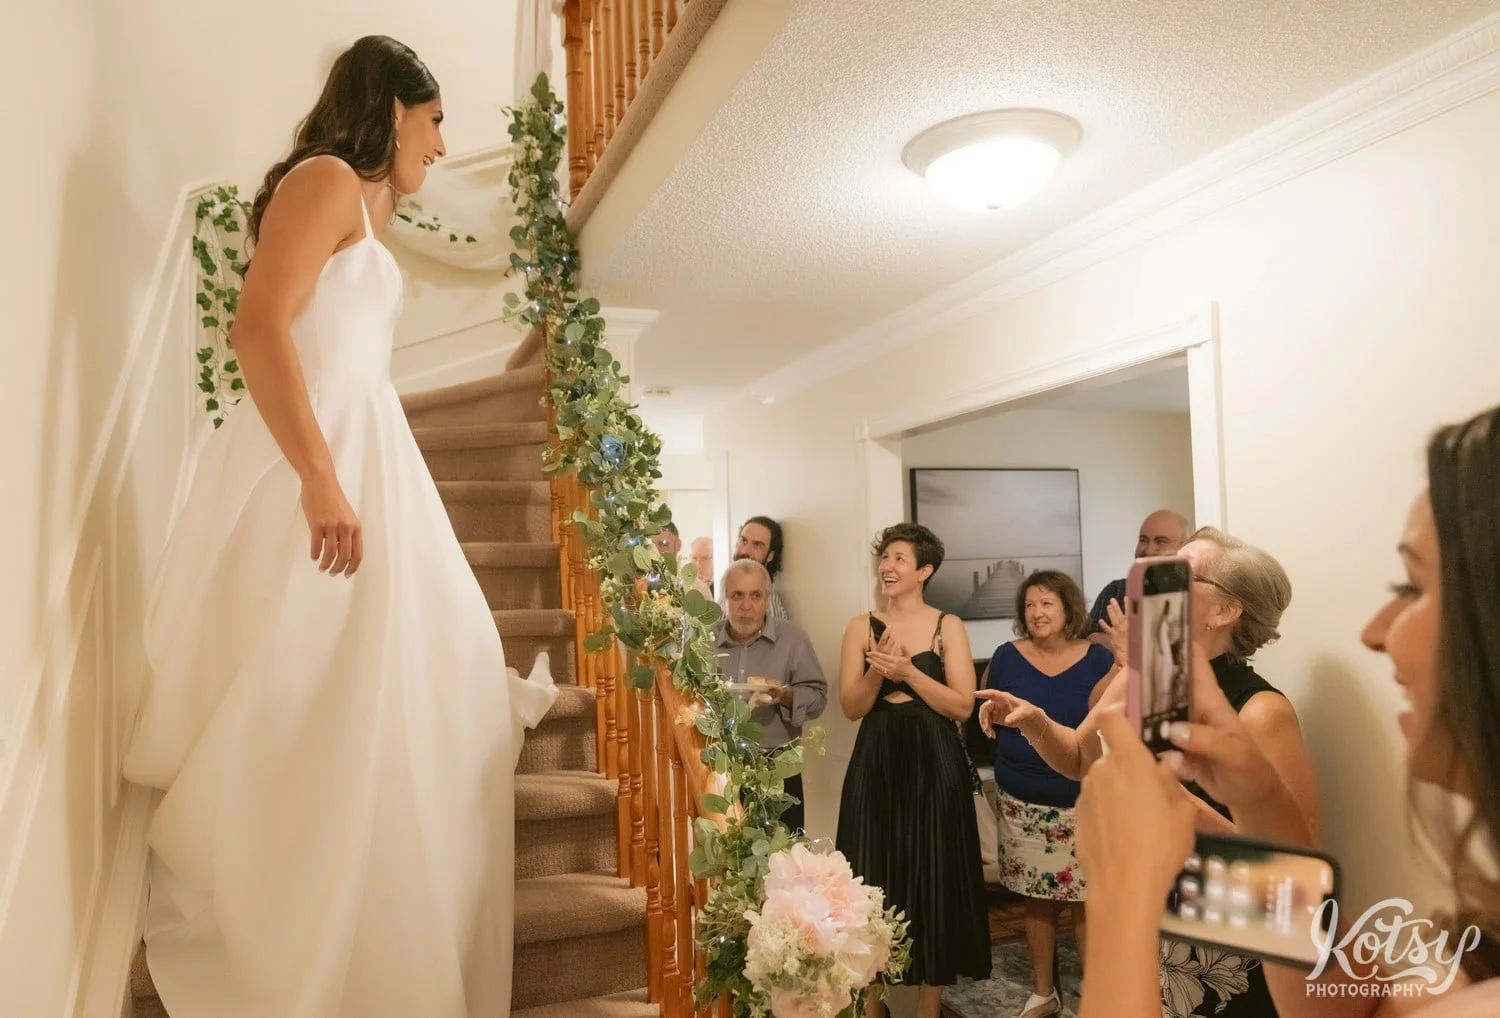 A bride is all smiles as she comes down a set of stairs inside a house with her family at the bottom